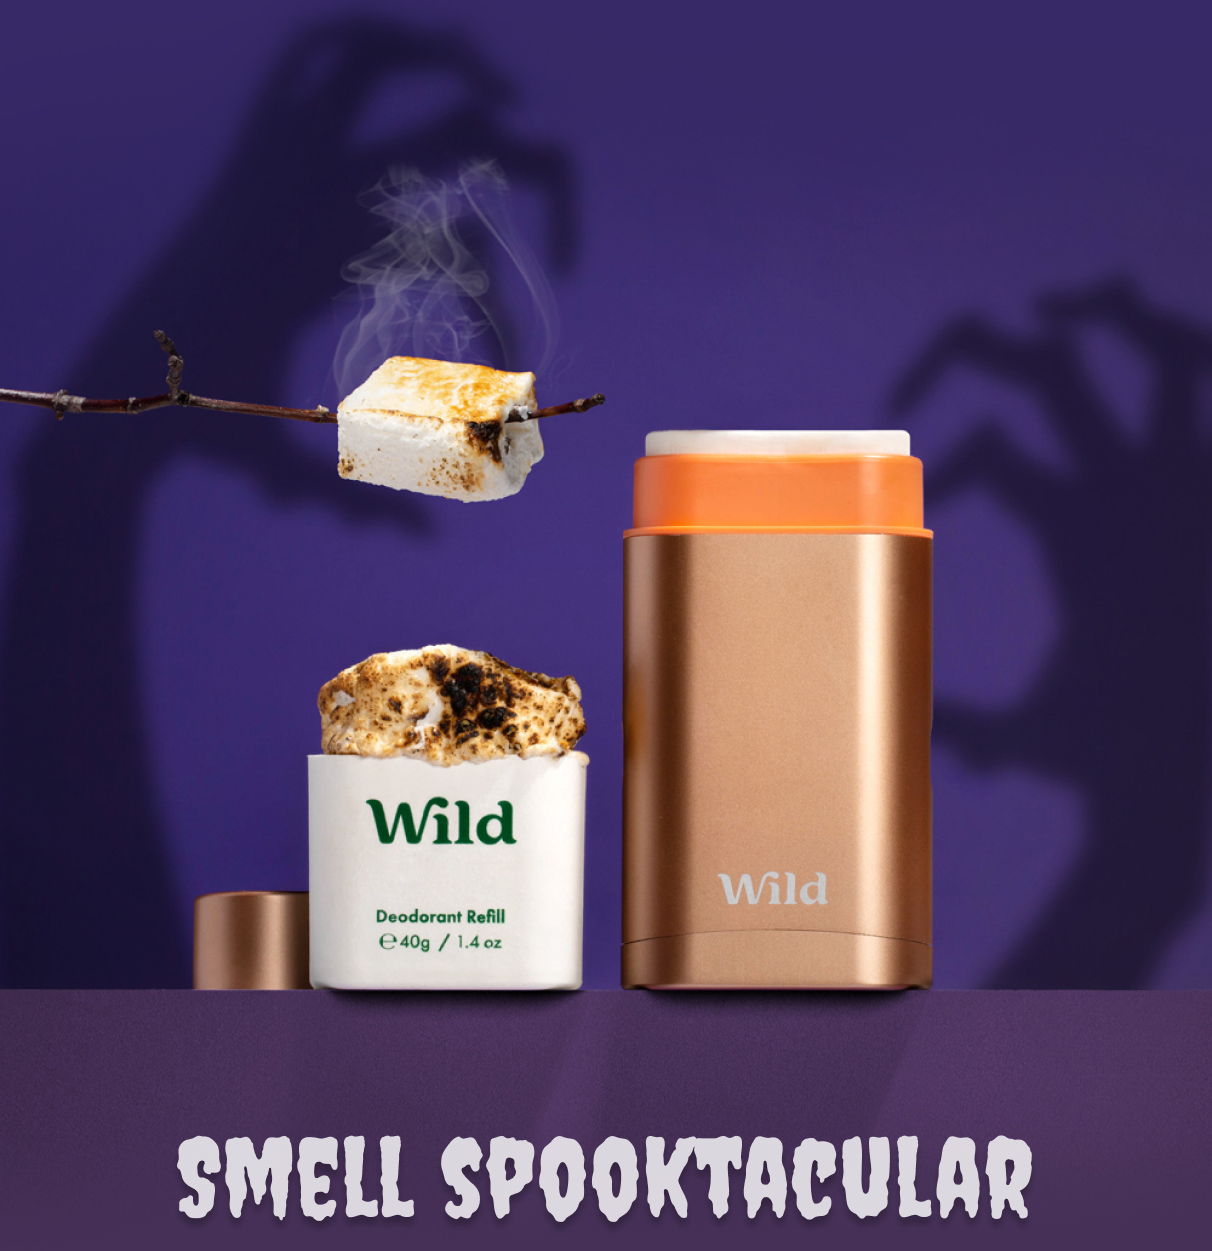 Wild Natural Deodorant: Introducing Toasted Marshmallow: Our